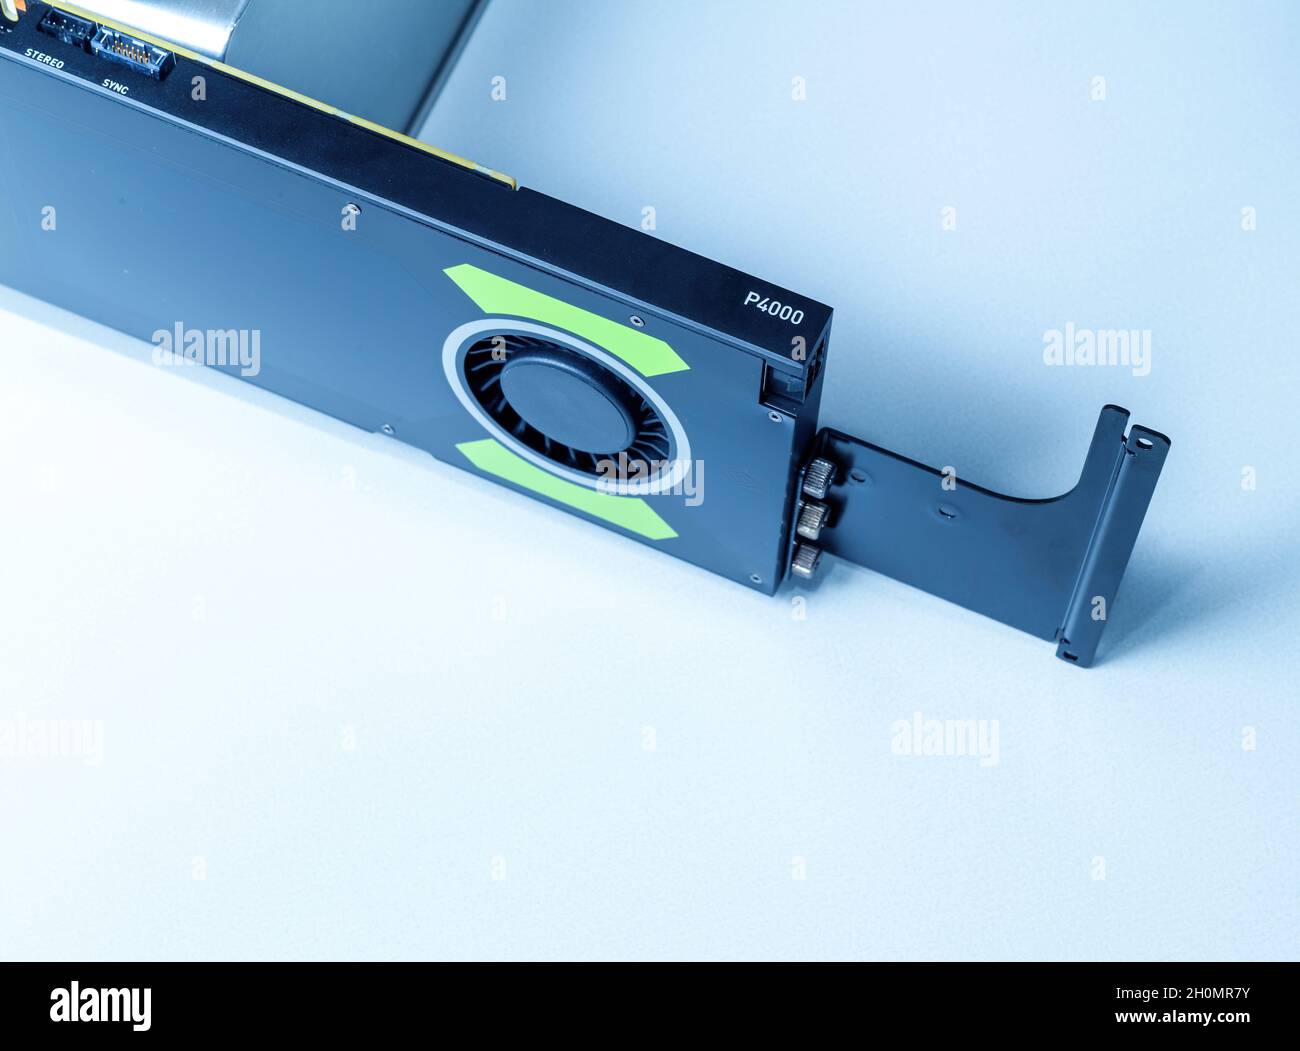 View from above of new Nvidia Quadro P4000 professional GPU video card  Stock Photo - Alamy